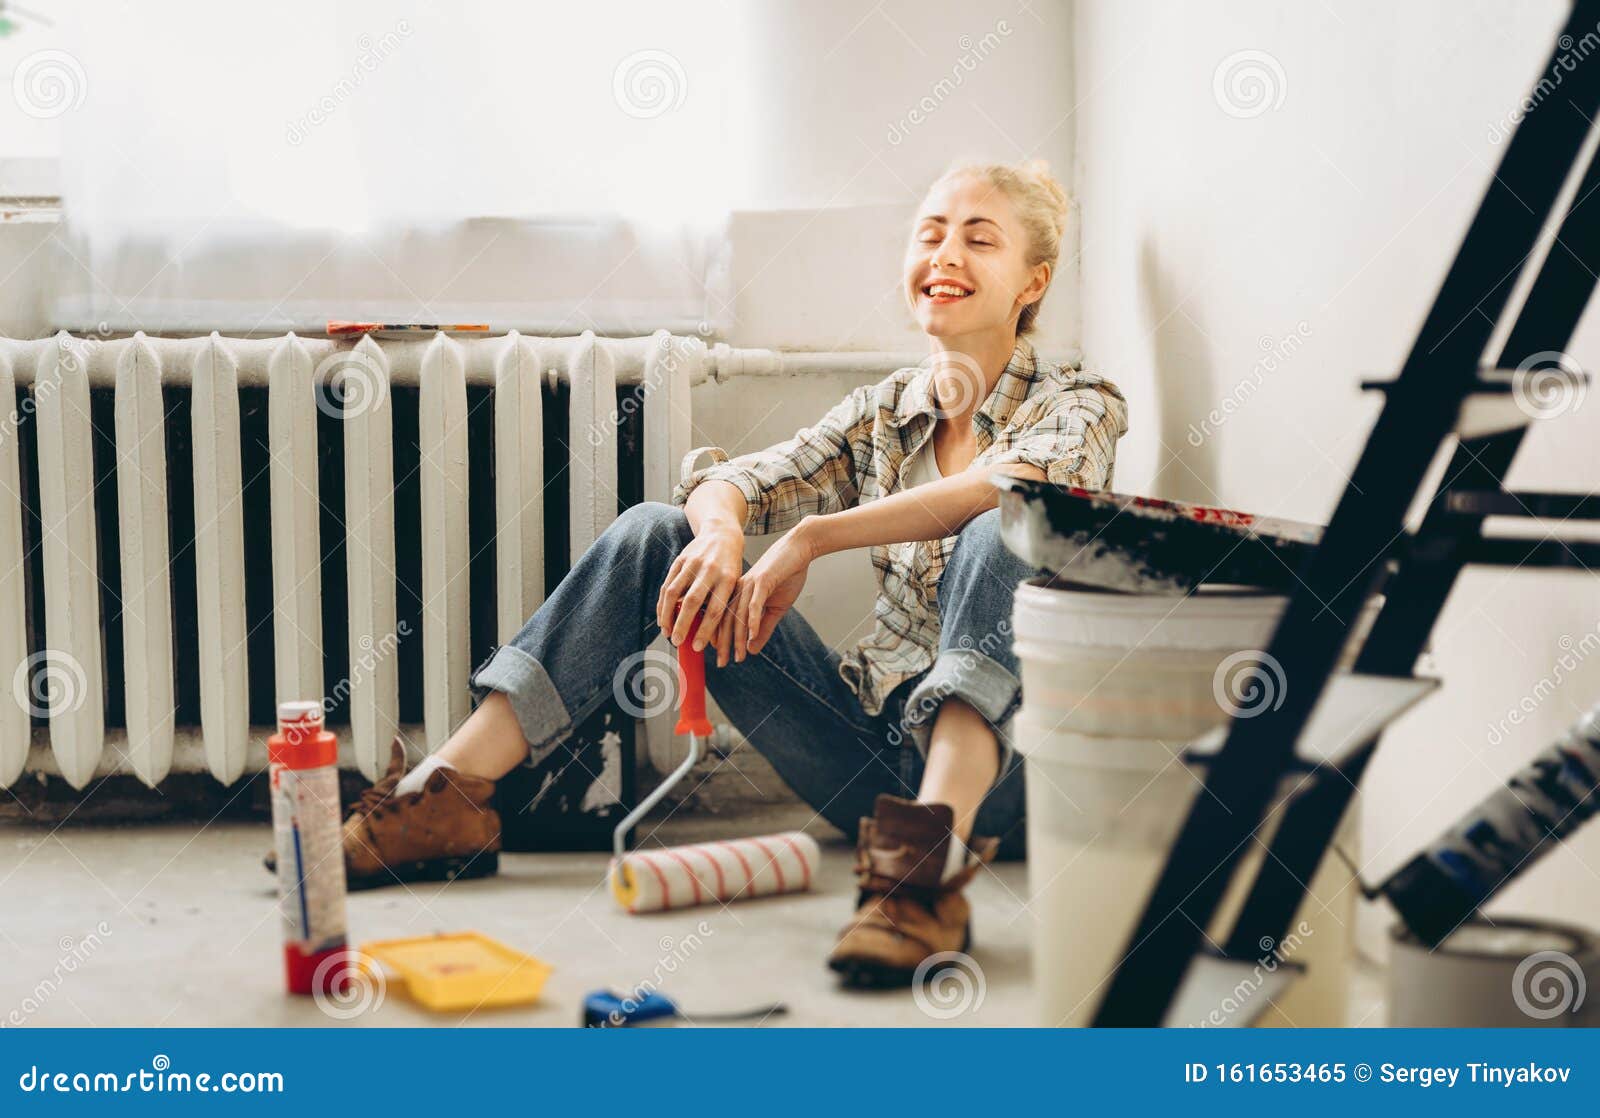 happy pretty young woman makes diy repairs in the house with her own hands. concept nontraditional gender roles, gender equality,